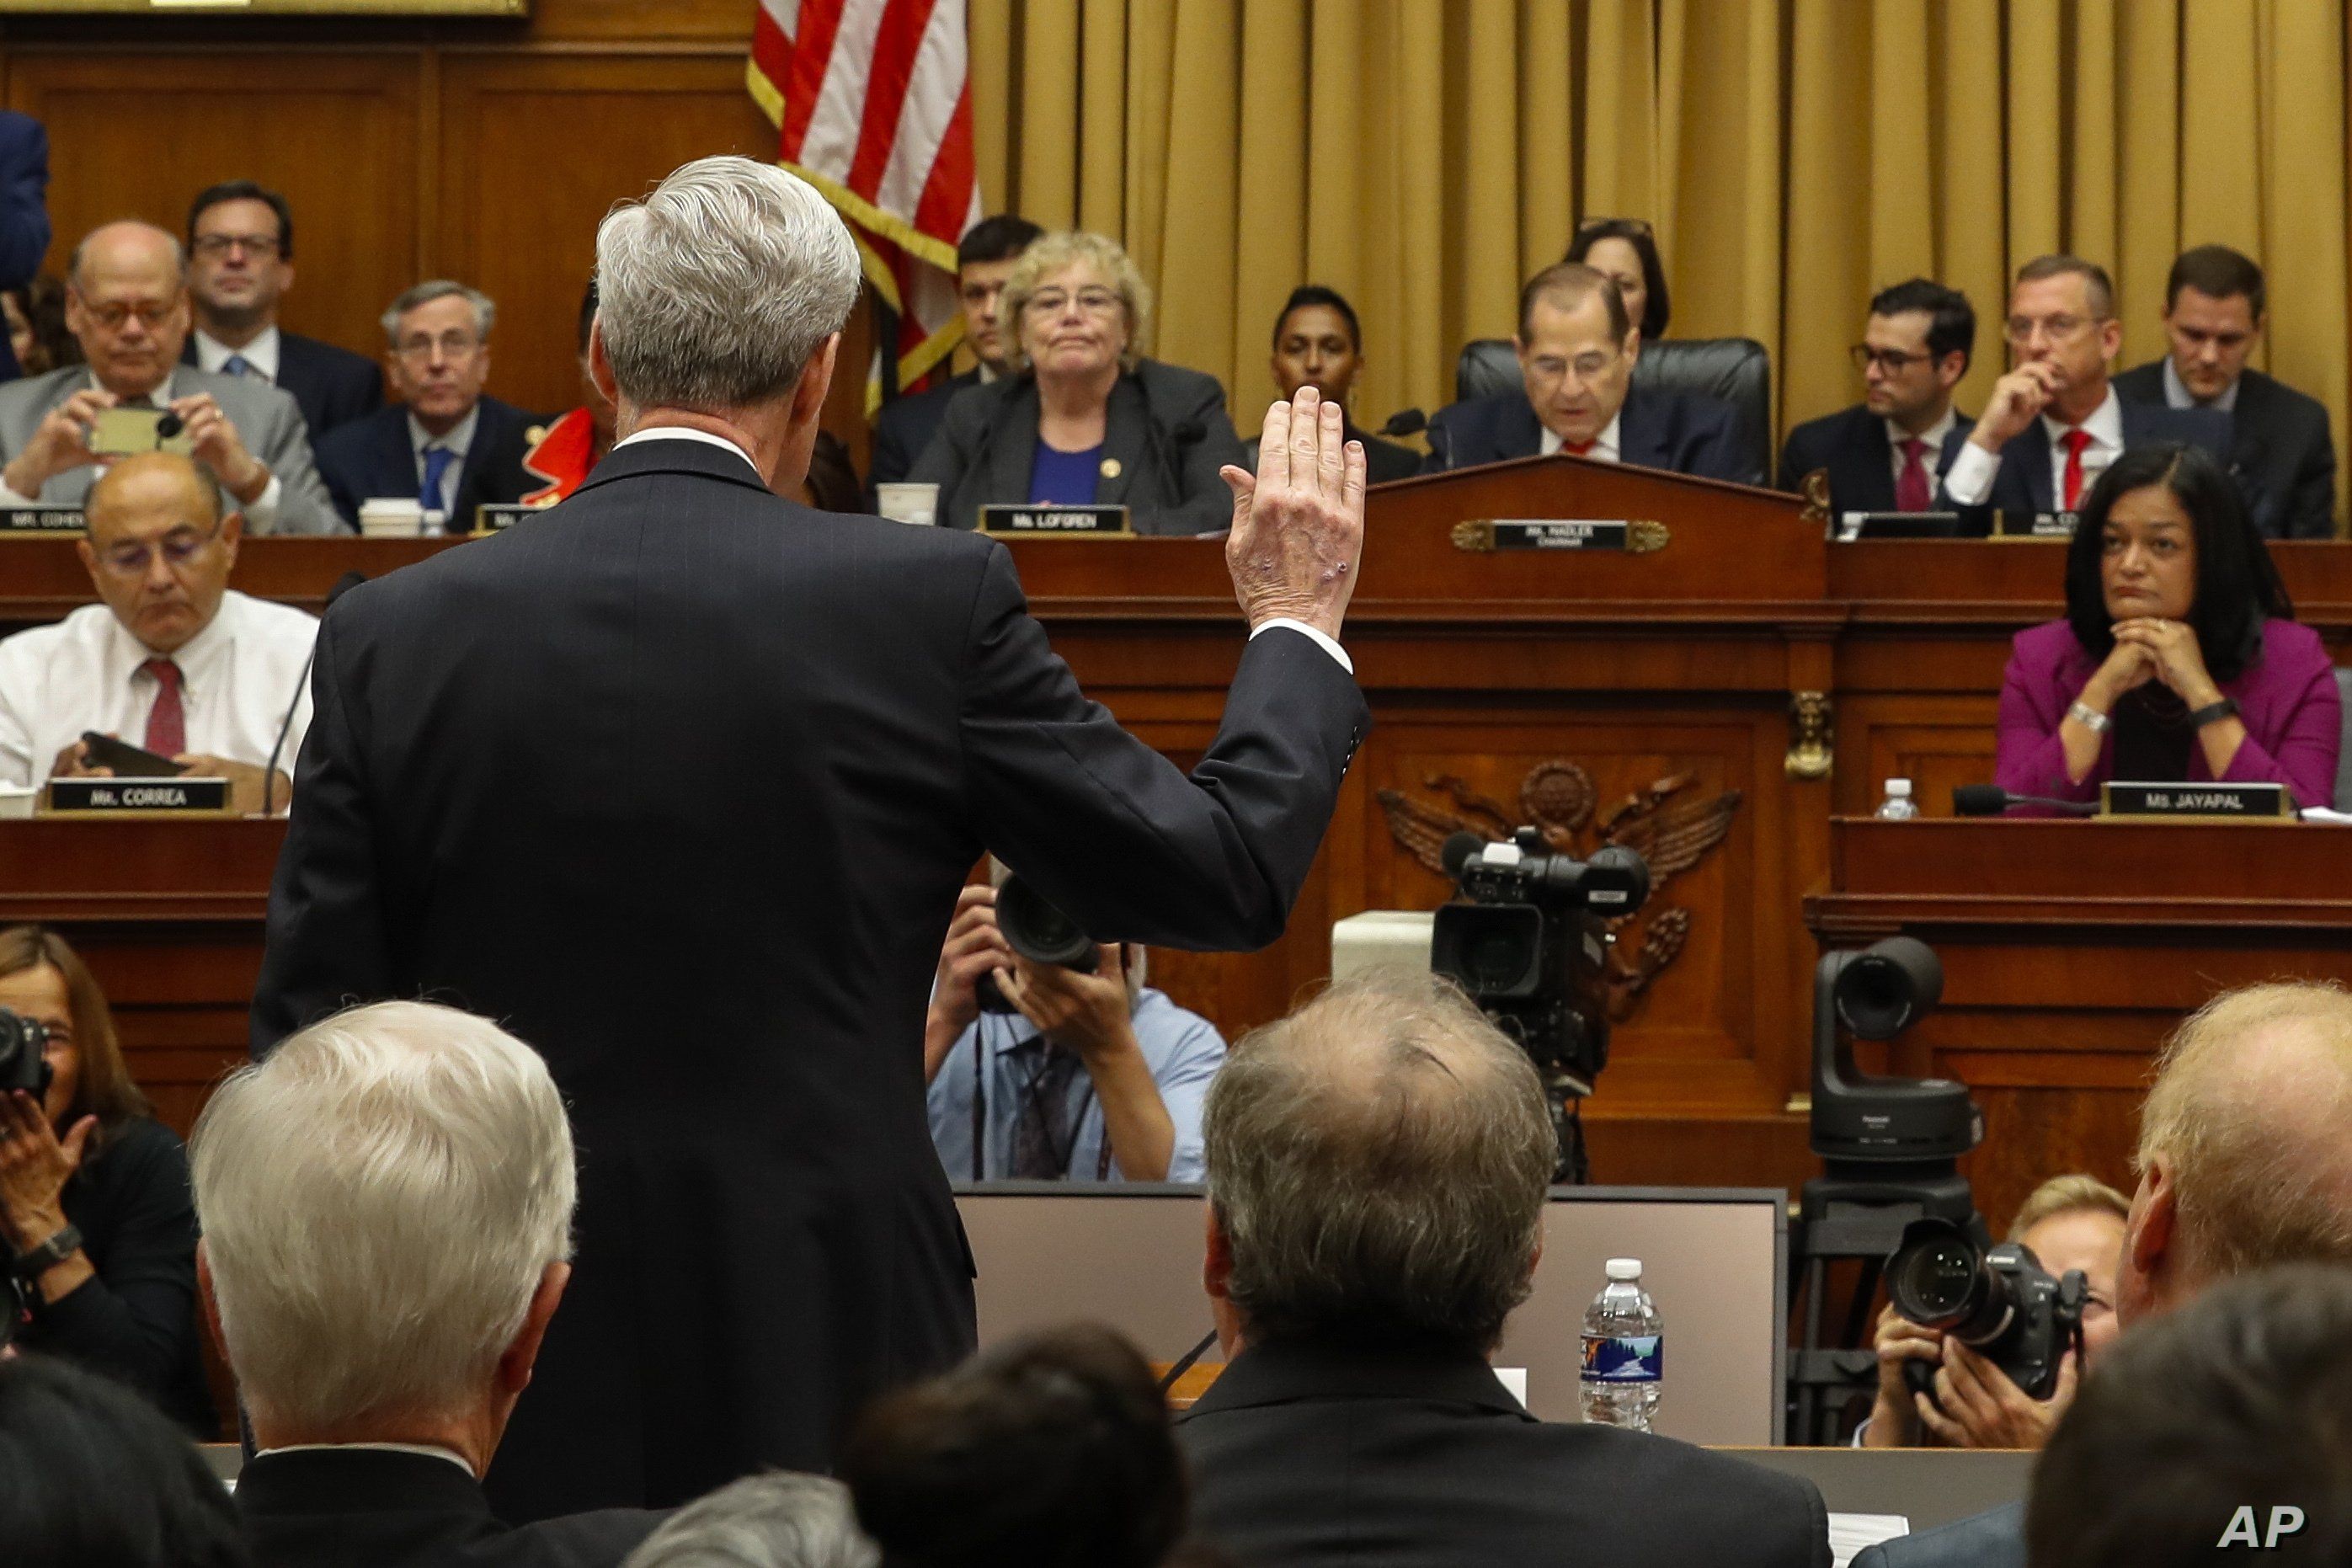  Former special counsel Robert Mueller is sworn in by House Judiciary Committee Chairman Jerrold Nadler to testify before the House Judiciary Committee hearing on Capitol Hill, July 24, 2019, in Washington. 